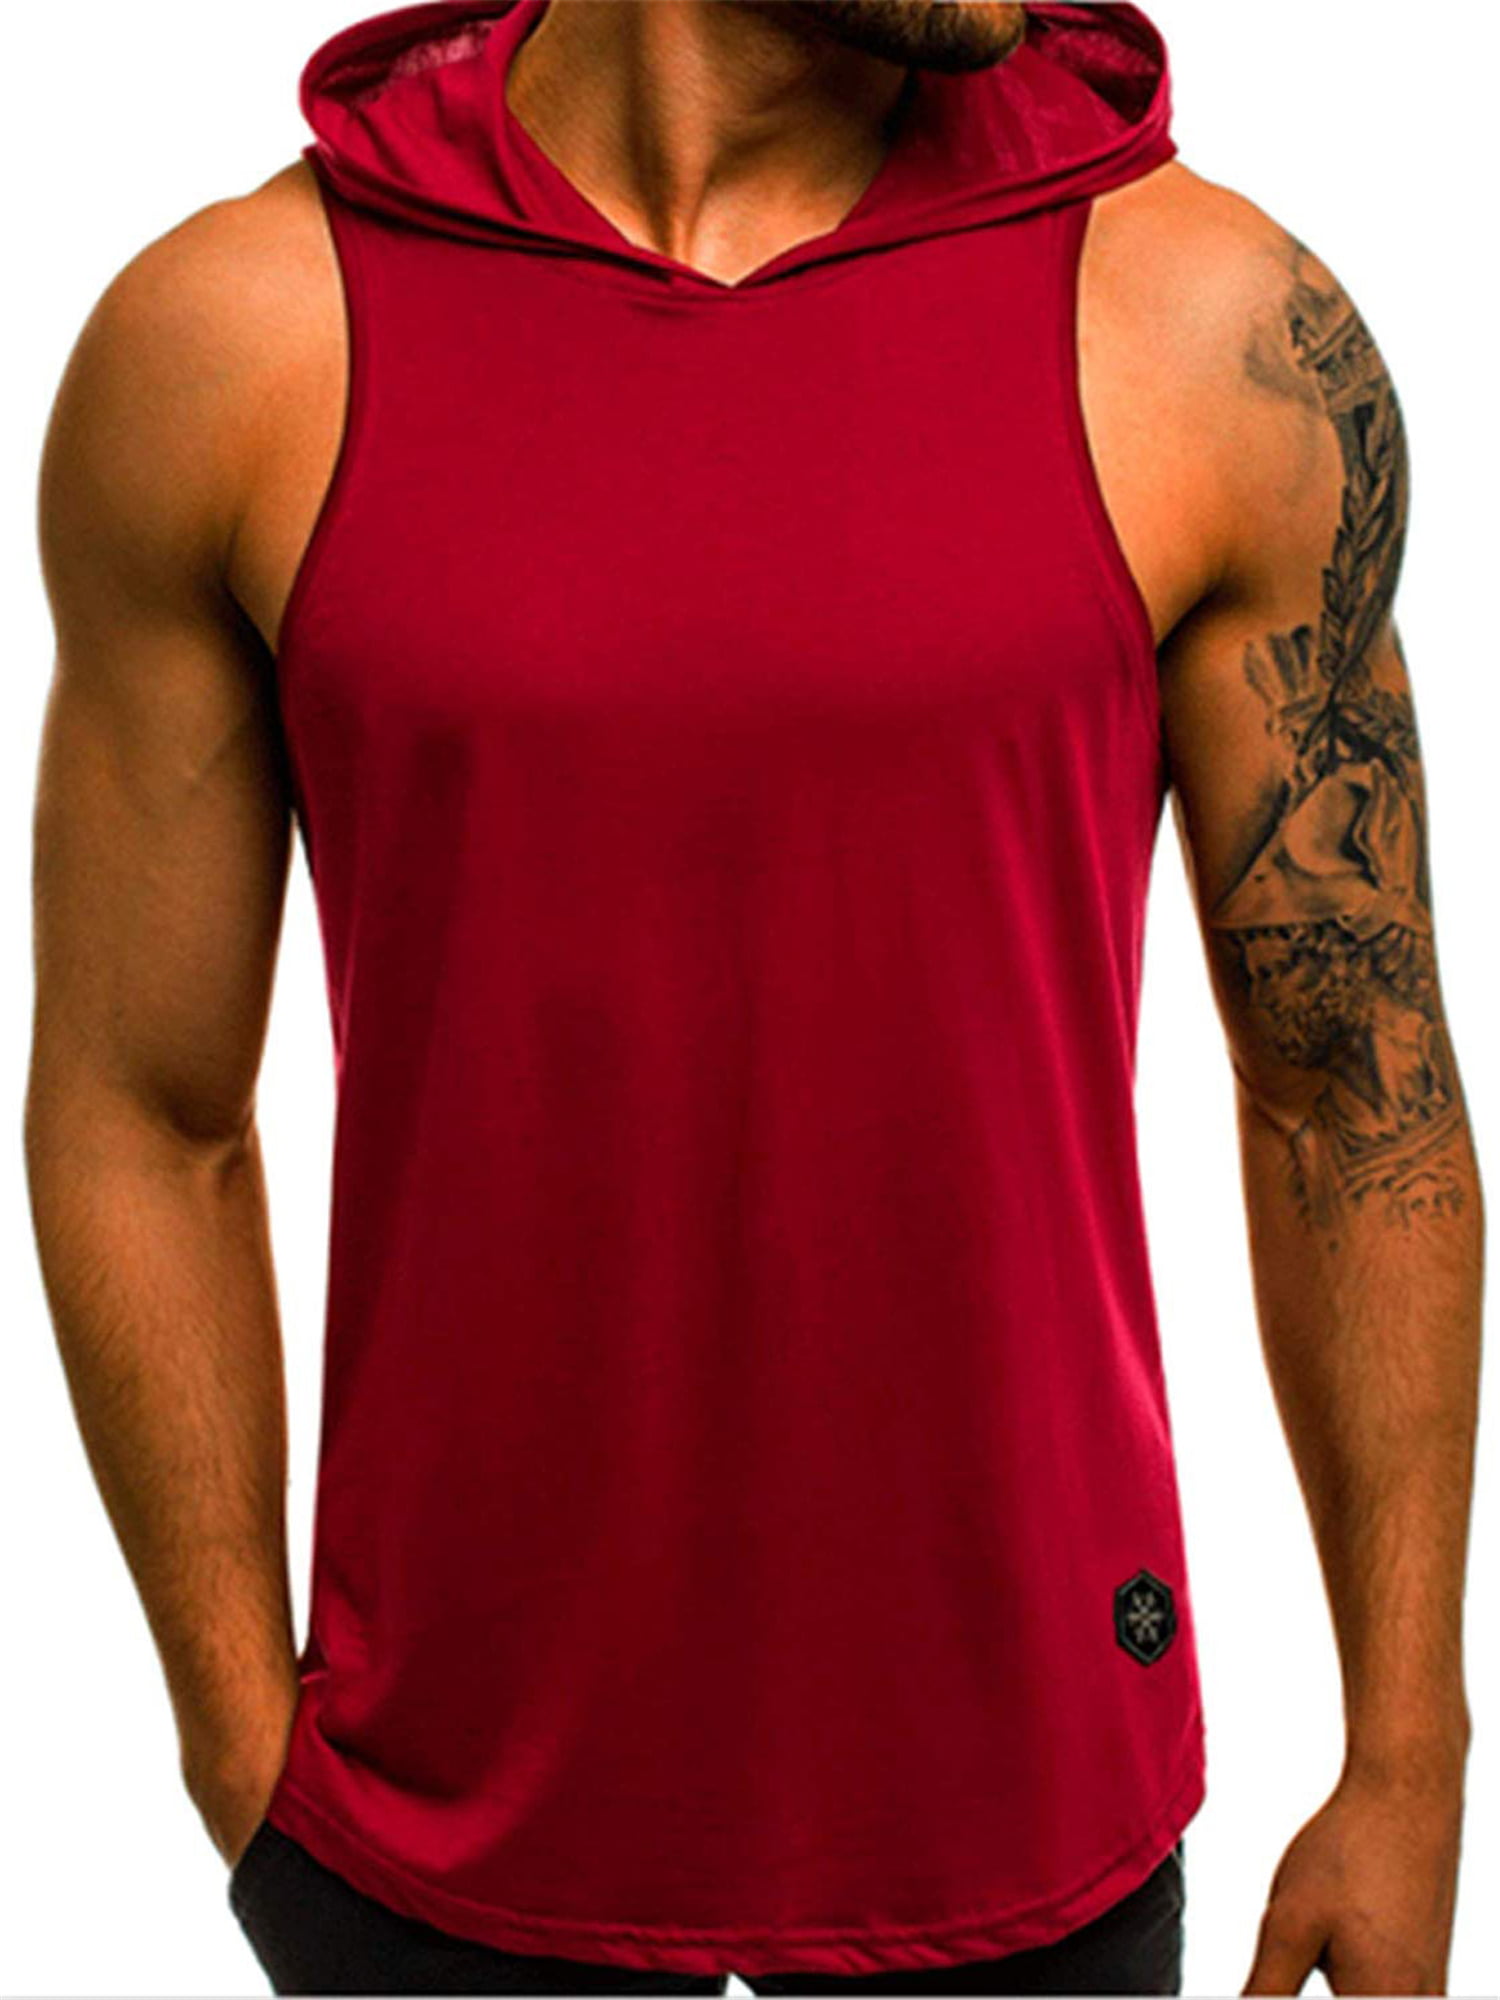 VEKDONE Mens Casual Hoodies Workout Tank Tops Sleeveless Undershirts Bodybuilding Muscle Cut Off T Shirt Loose Tops 